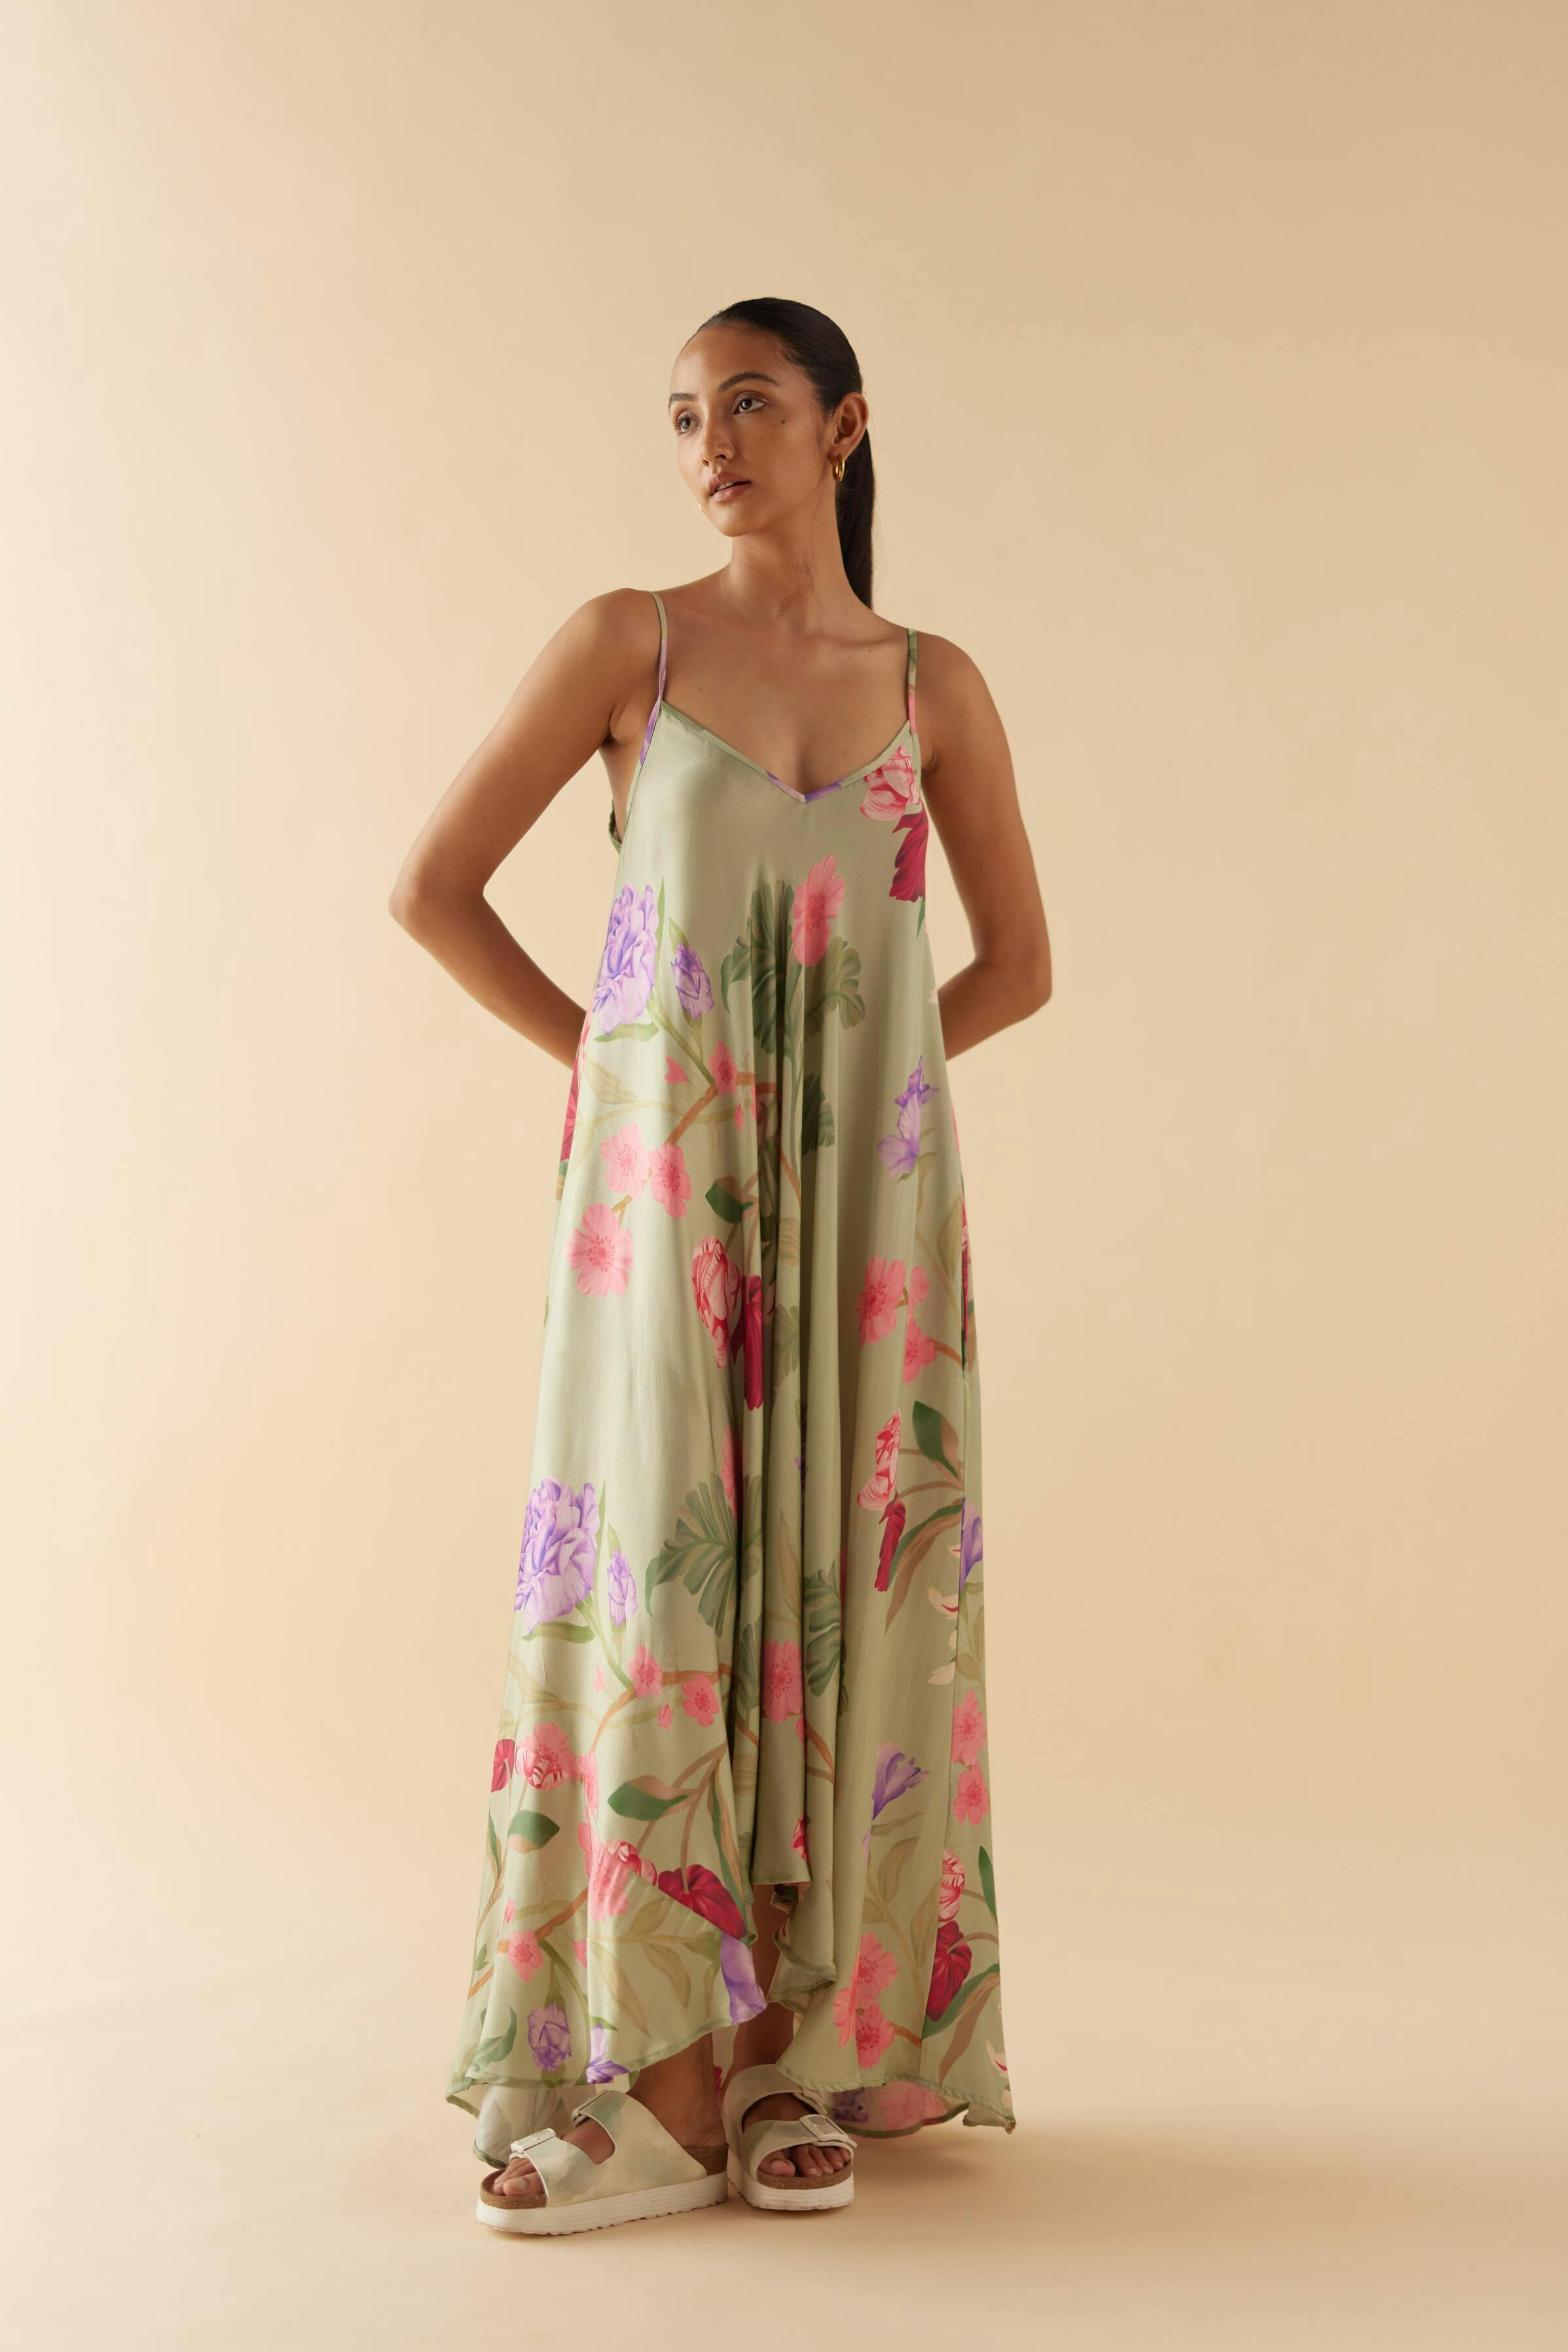 Thumbnail preview #1 for Jade Floral Dream Lounge Cami Dress